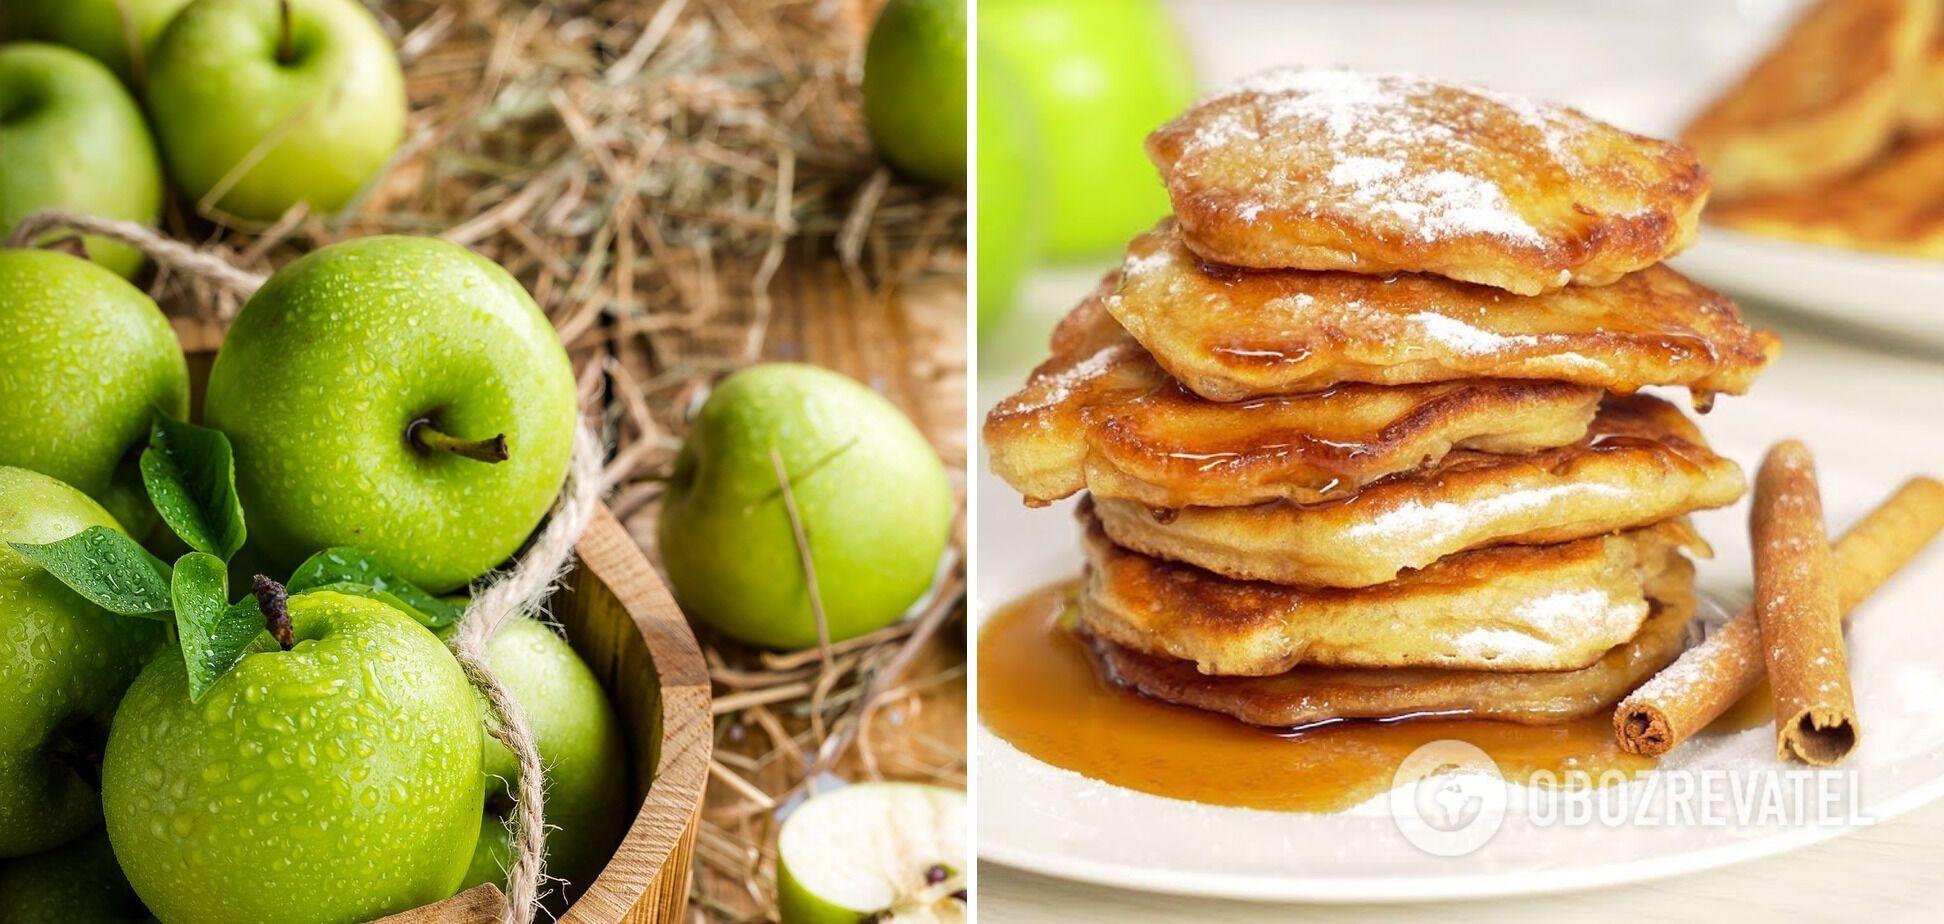 Apple pancakes on kefir: always come out fluffy